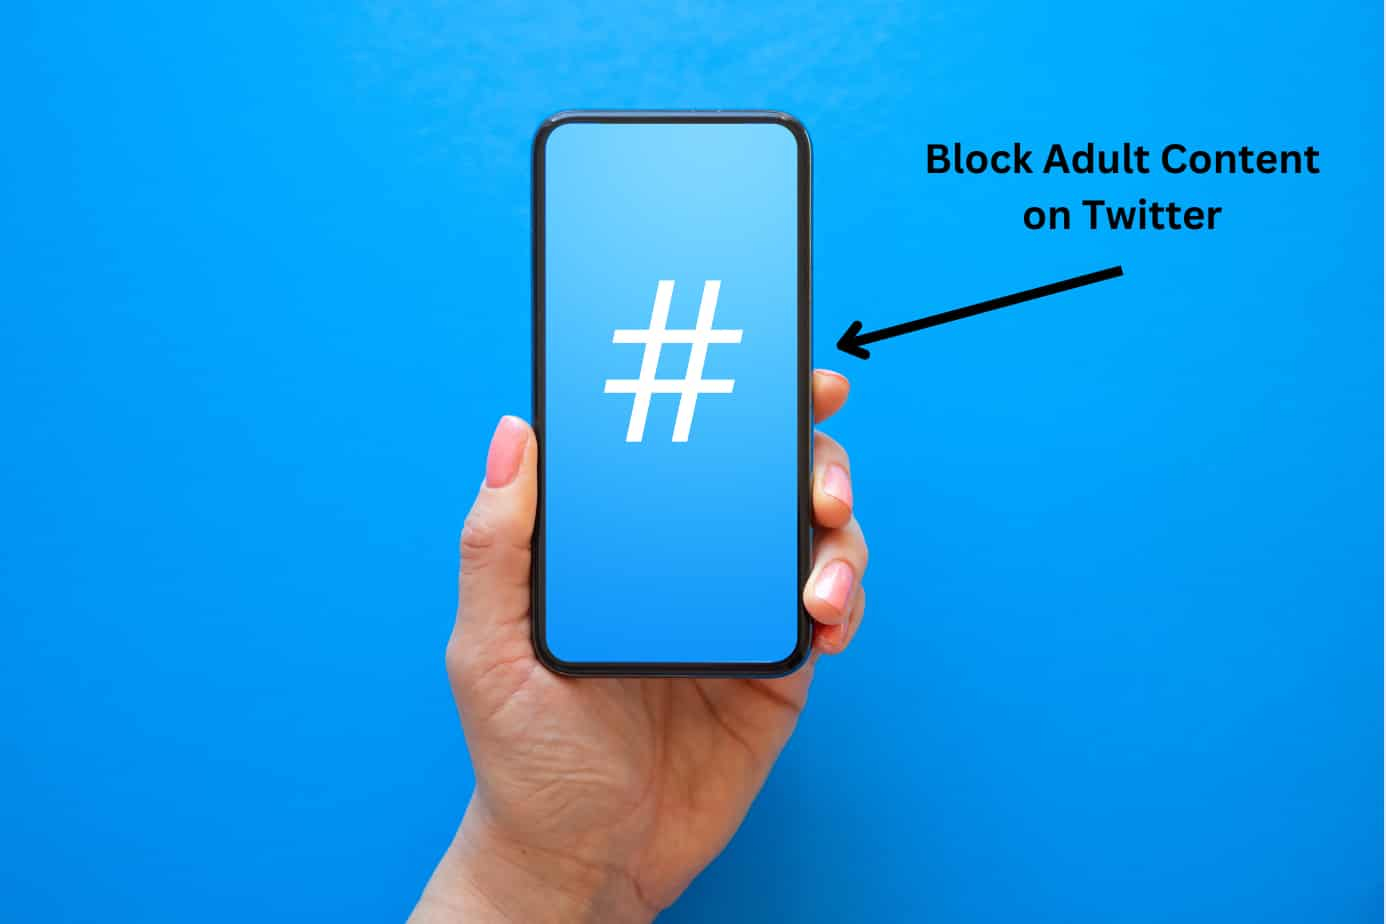 How to block adult content on Twitter